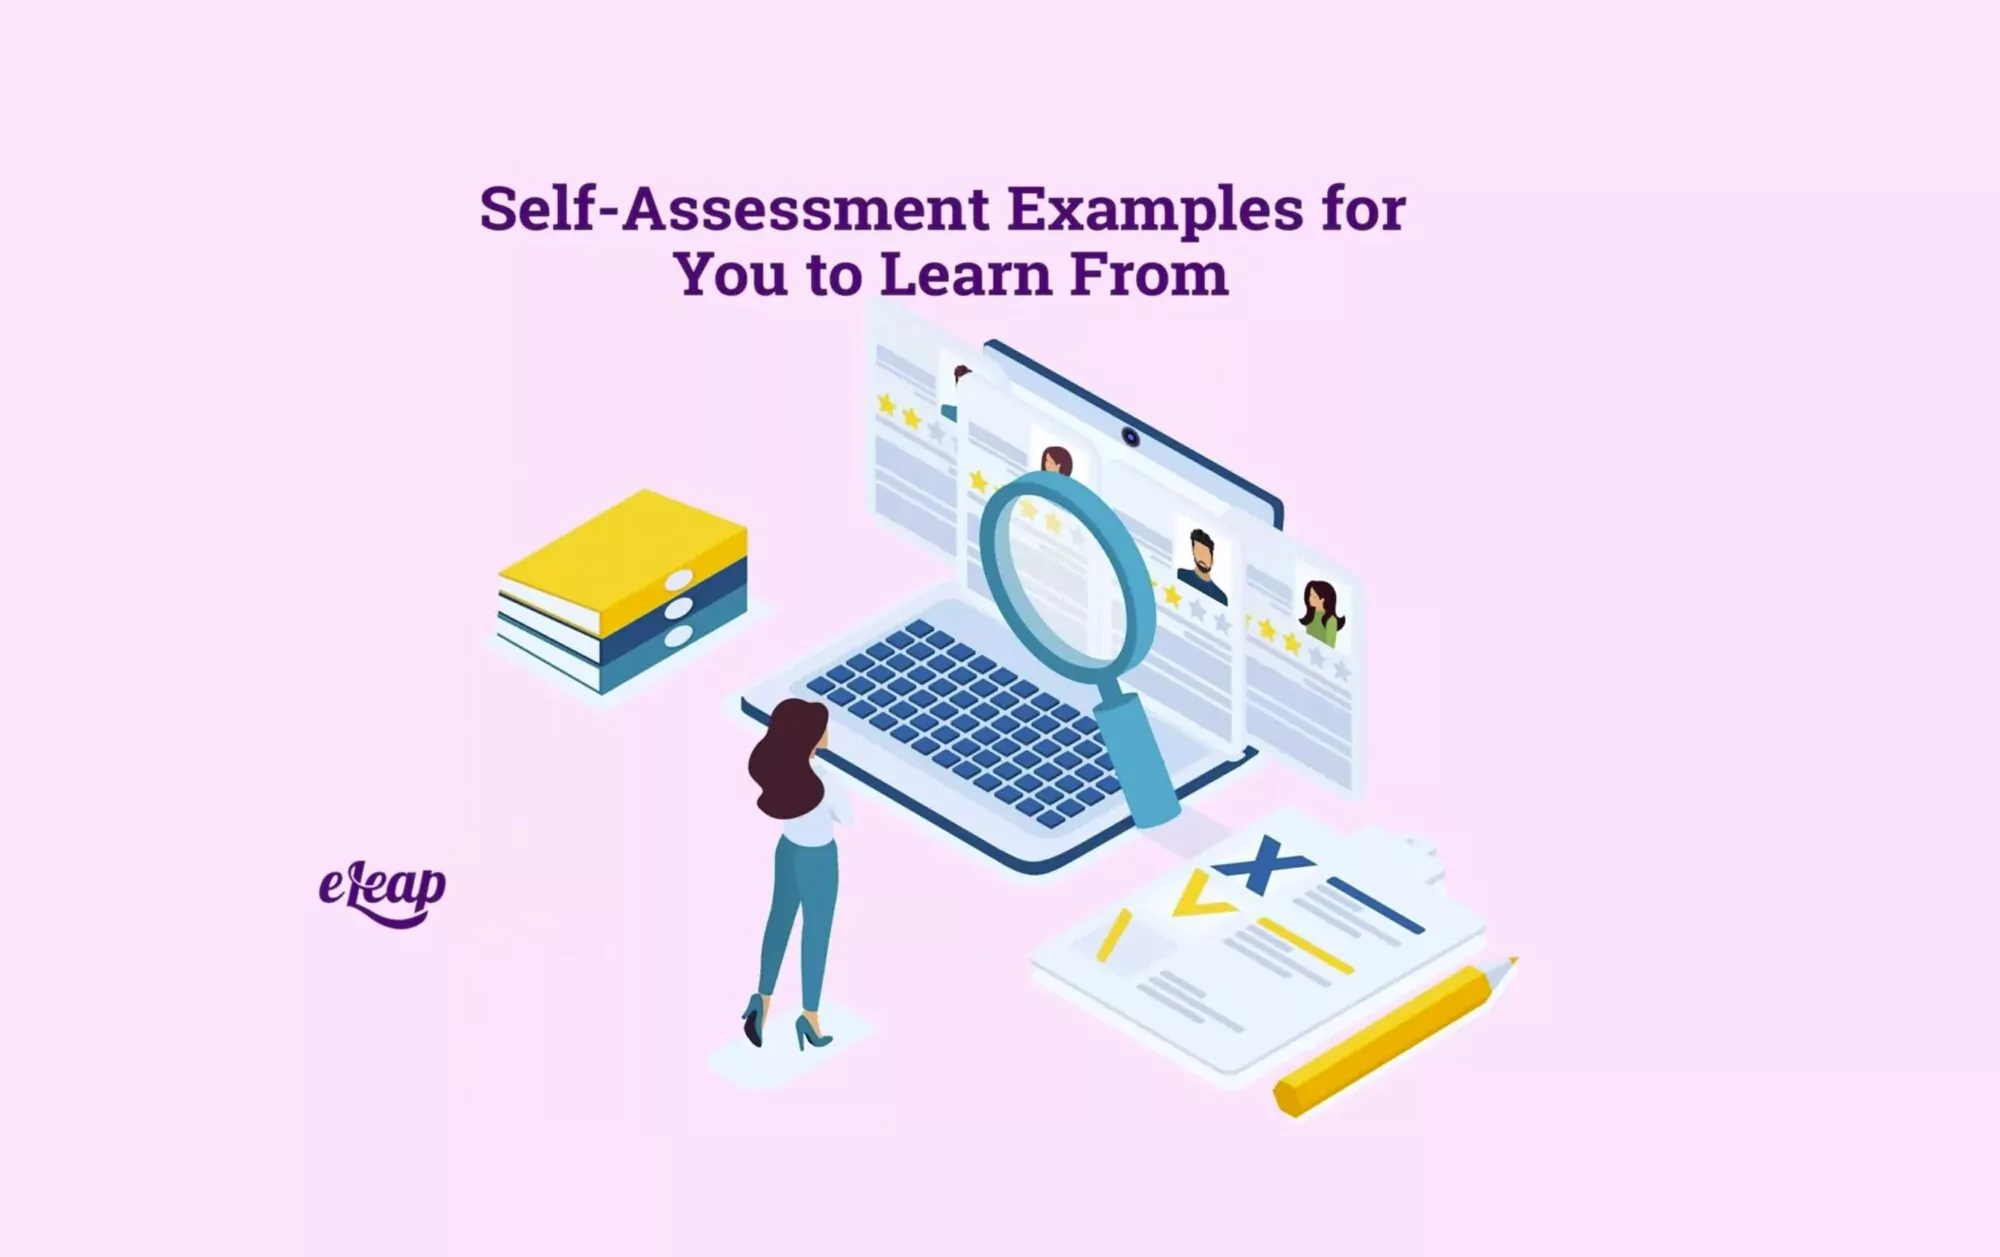 Self-Assessment Examples